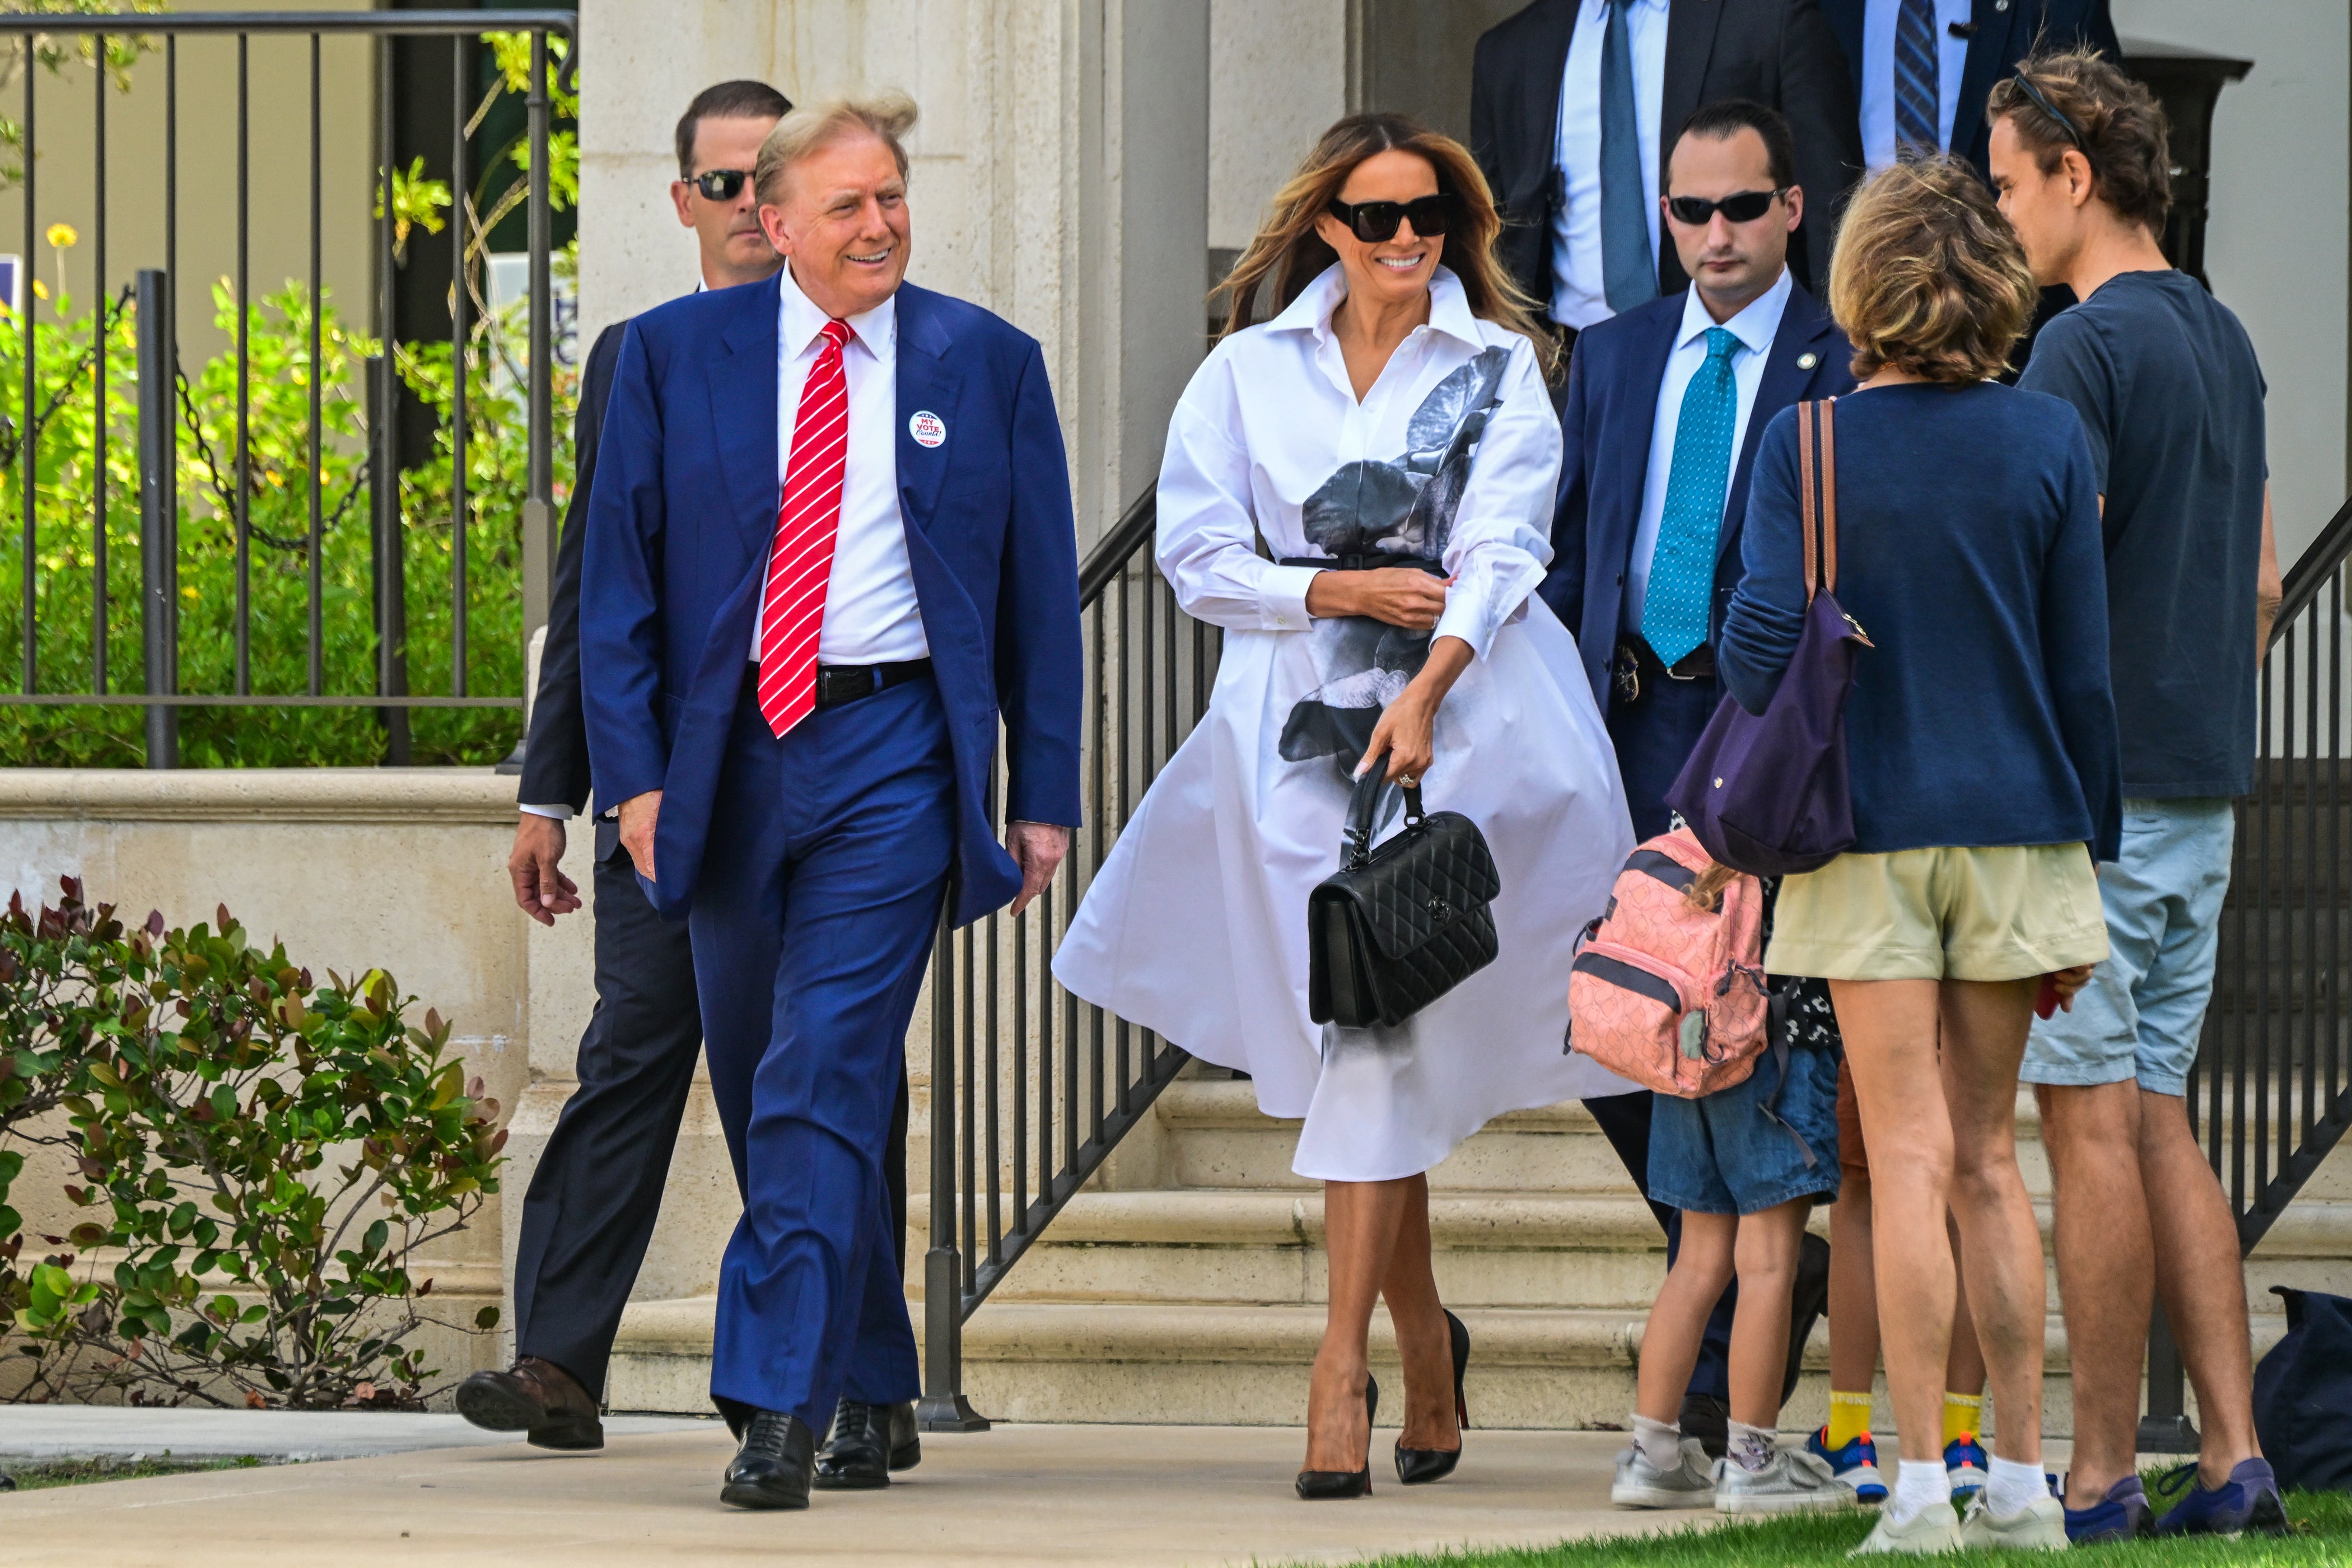 Melania voted with the former president in March